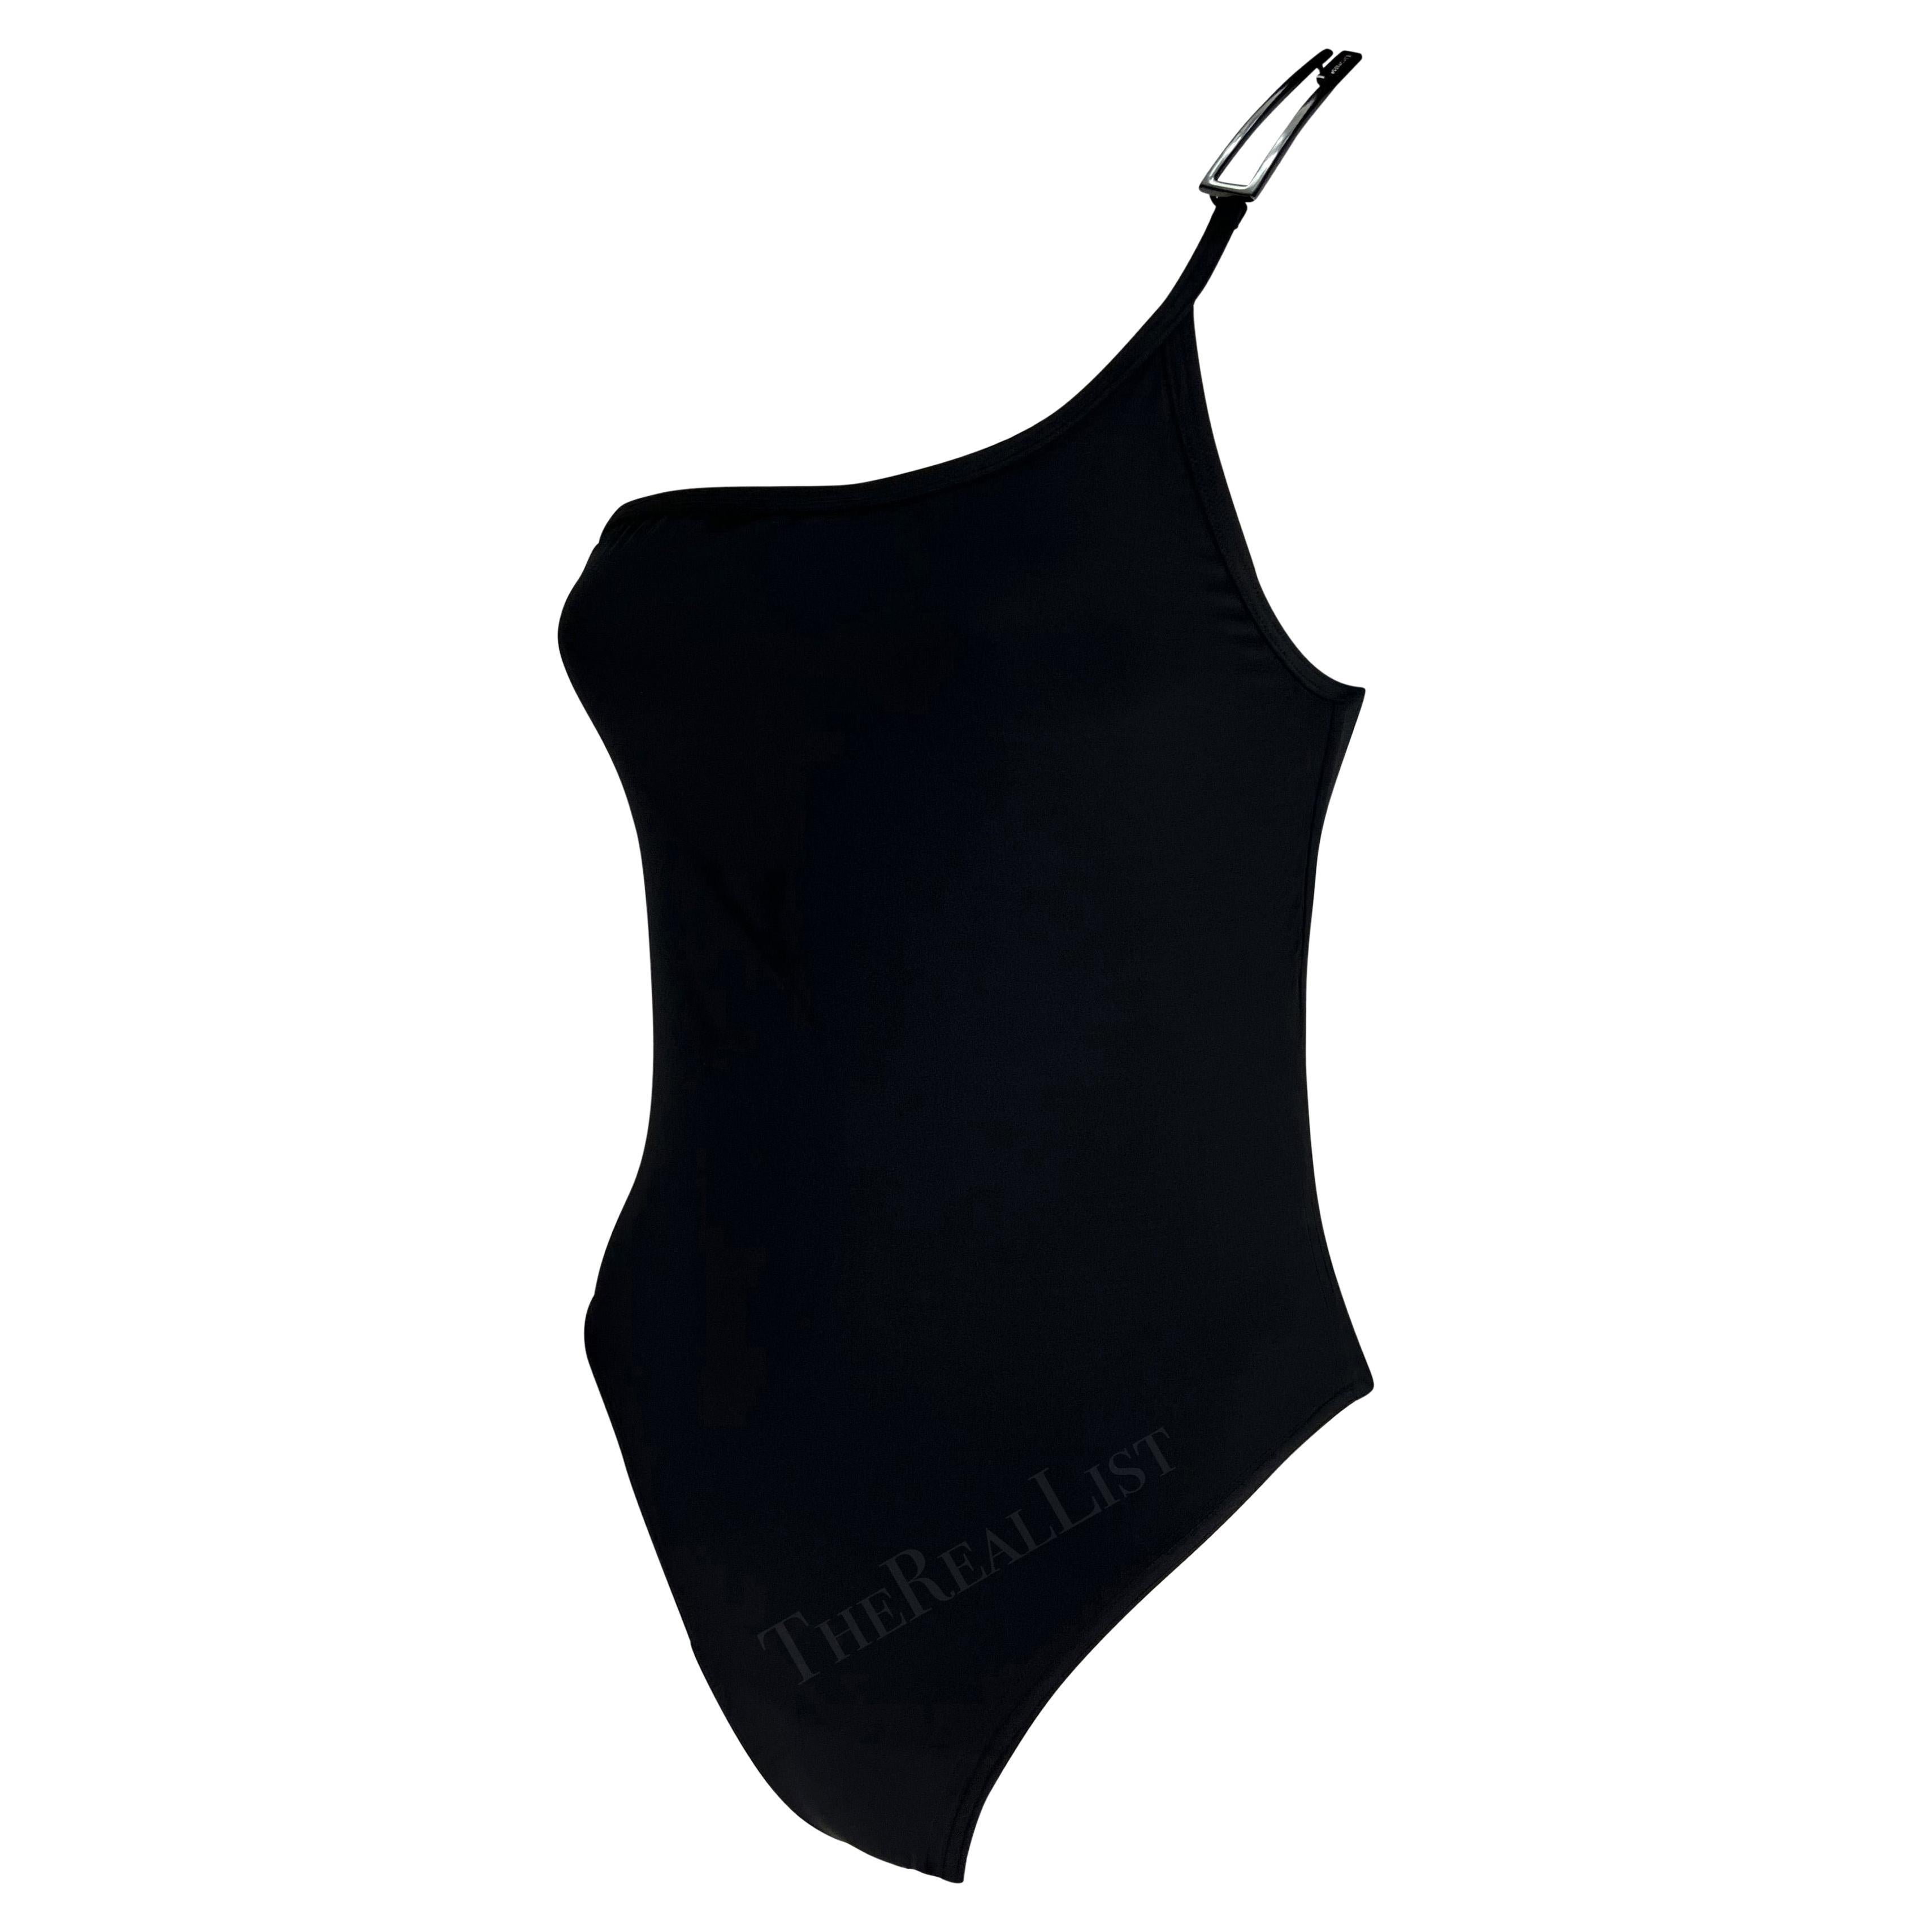 S/S 1998 Gucci by Tom Ford Black 'G' Buckle Logo One Piece Swimsuit Bodysuit For Sale